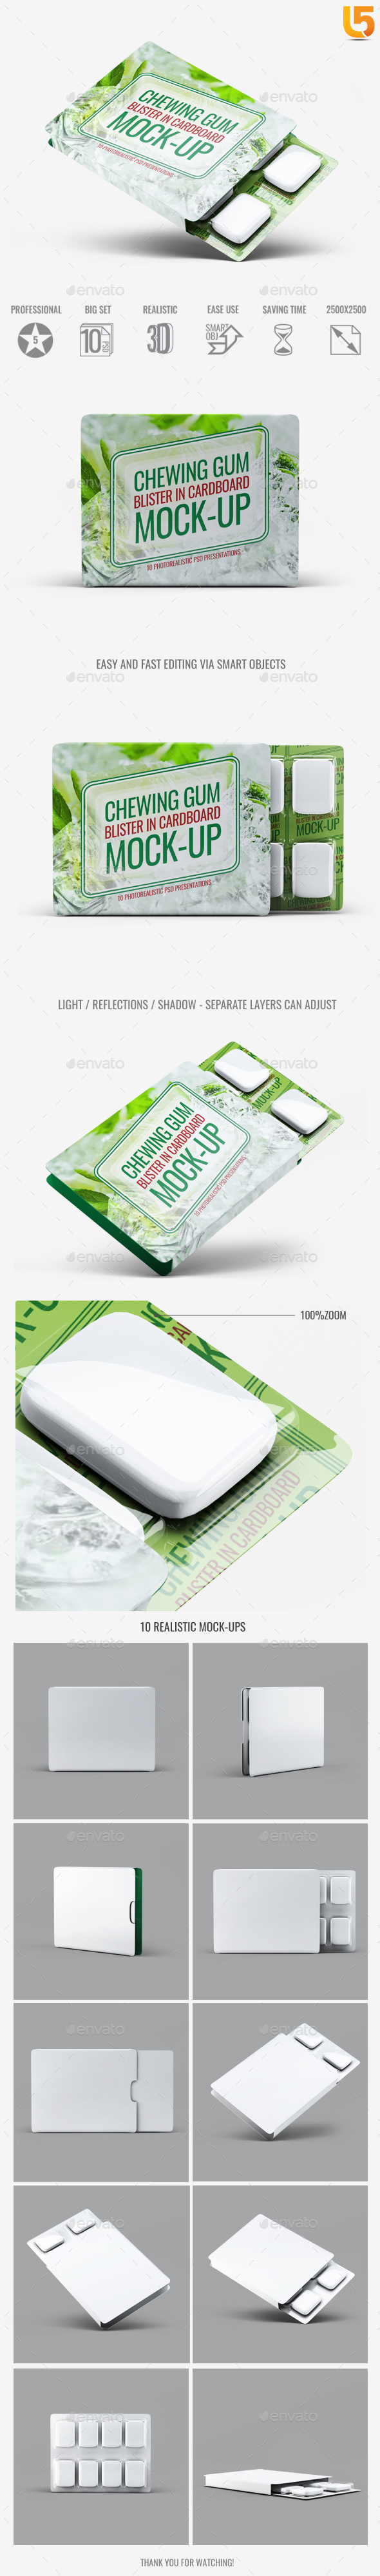 GraphicRiver Chewing Gum Blister in Cardboard Mock-Up 20413007